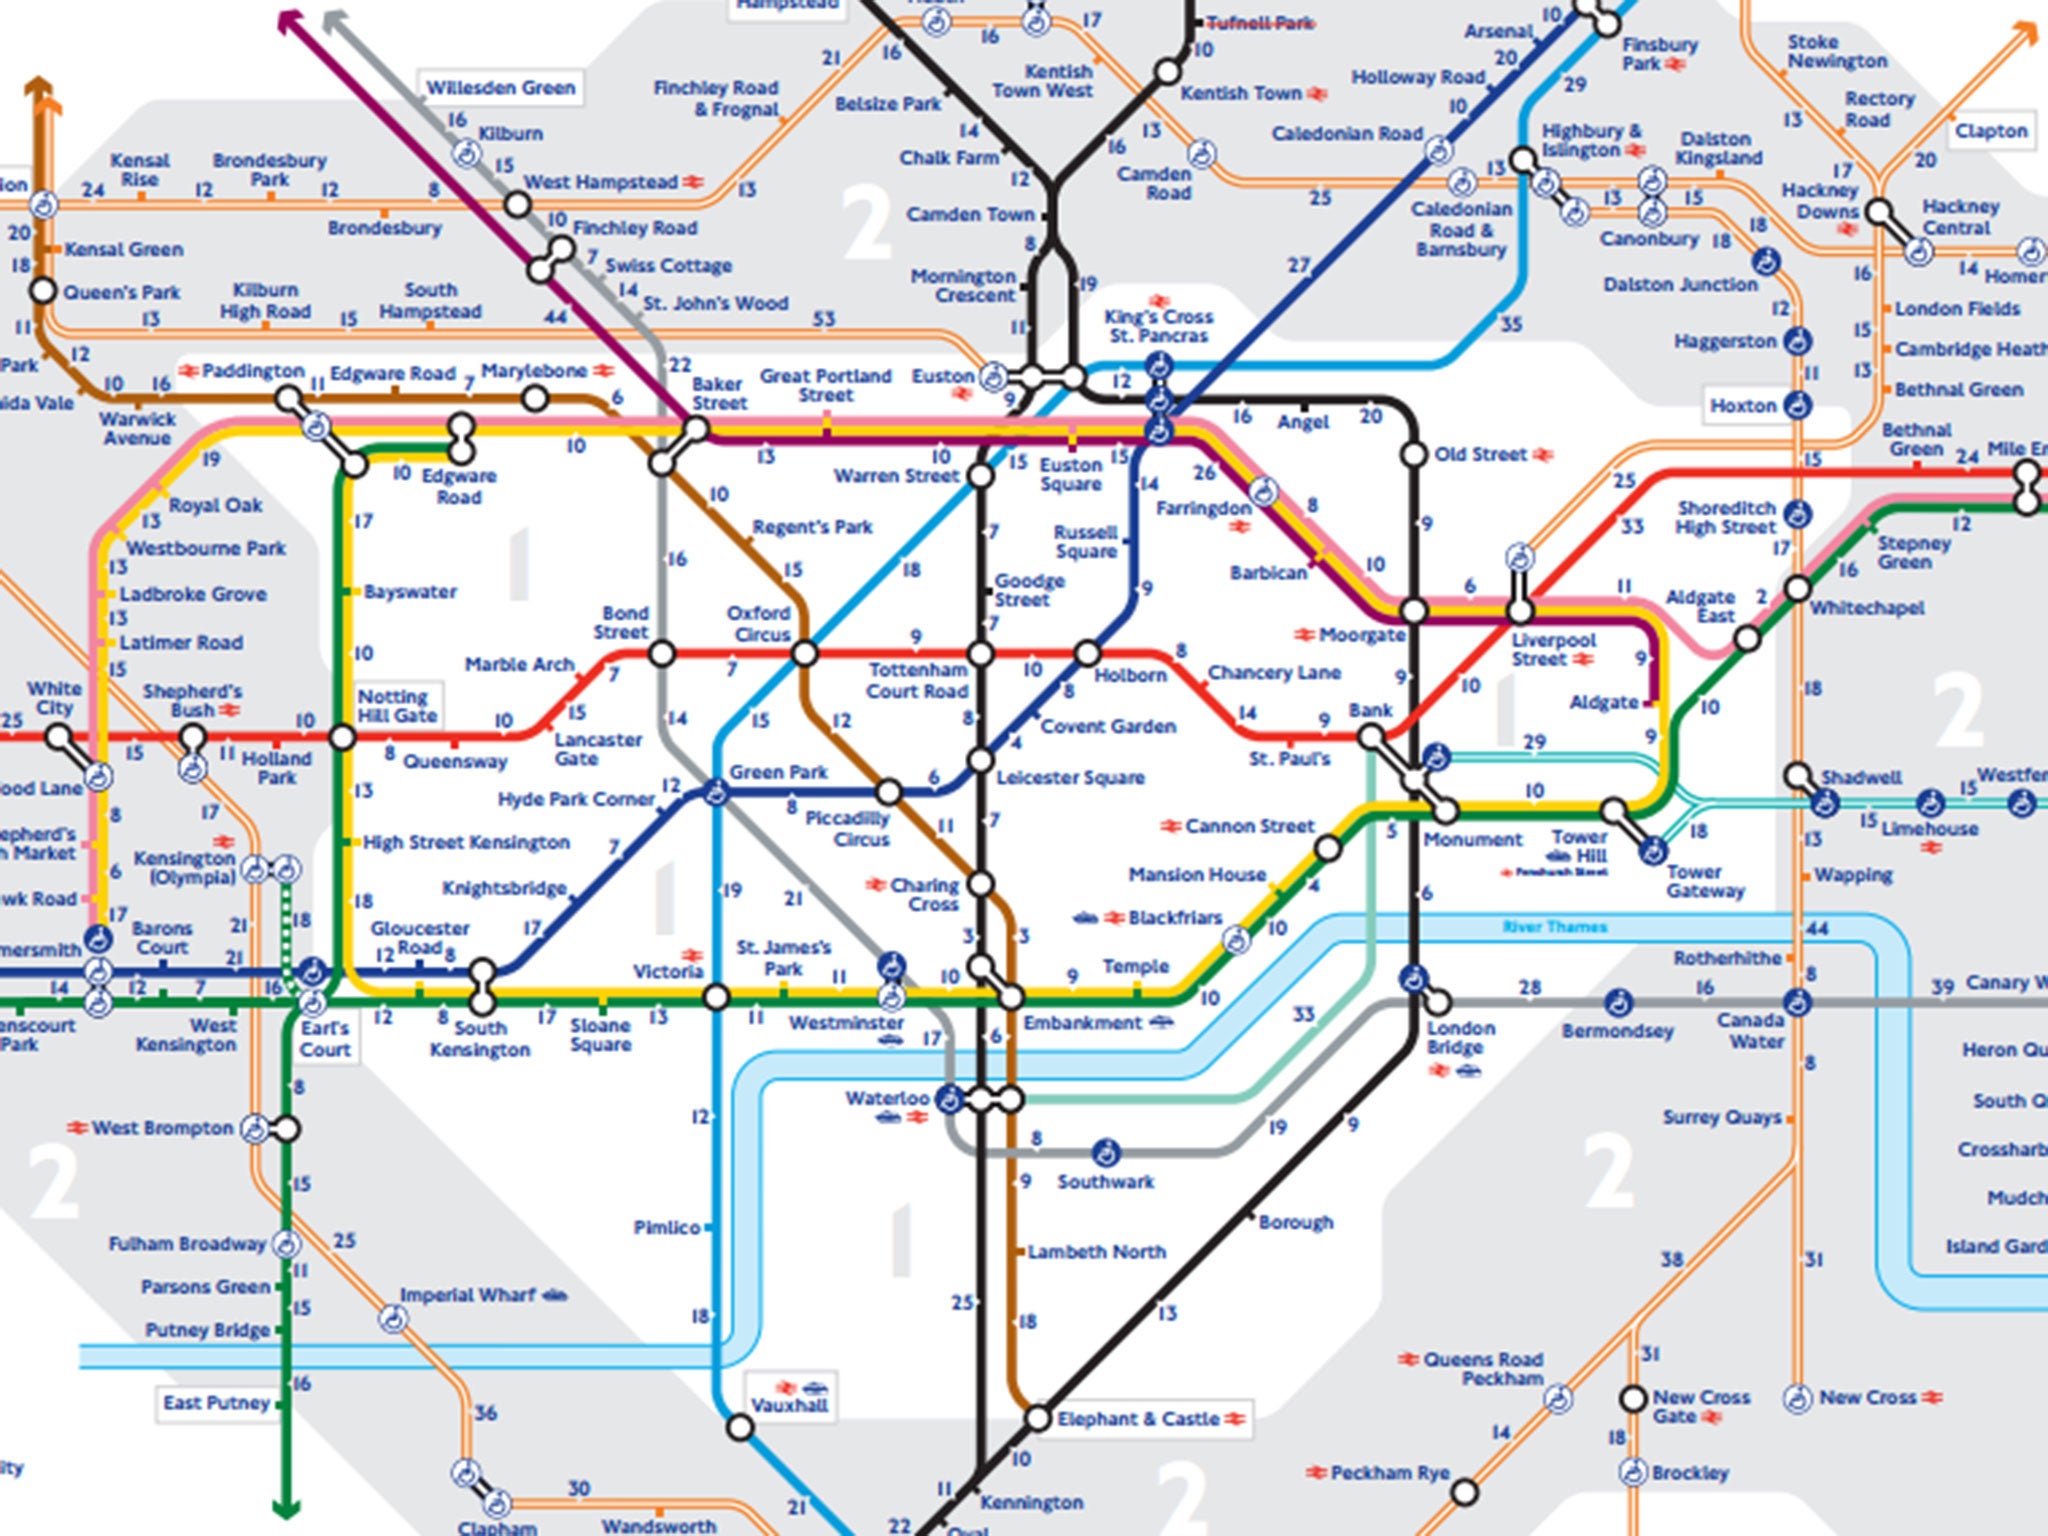 TfL releases first official 'walk the Tube' map for London The